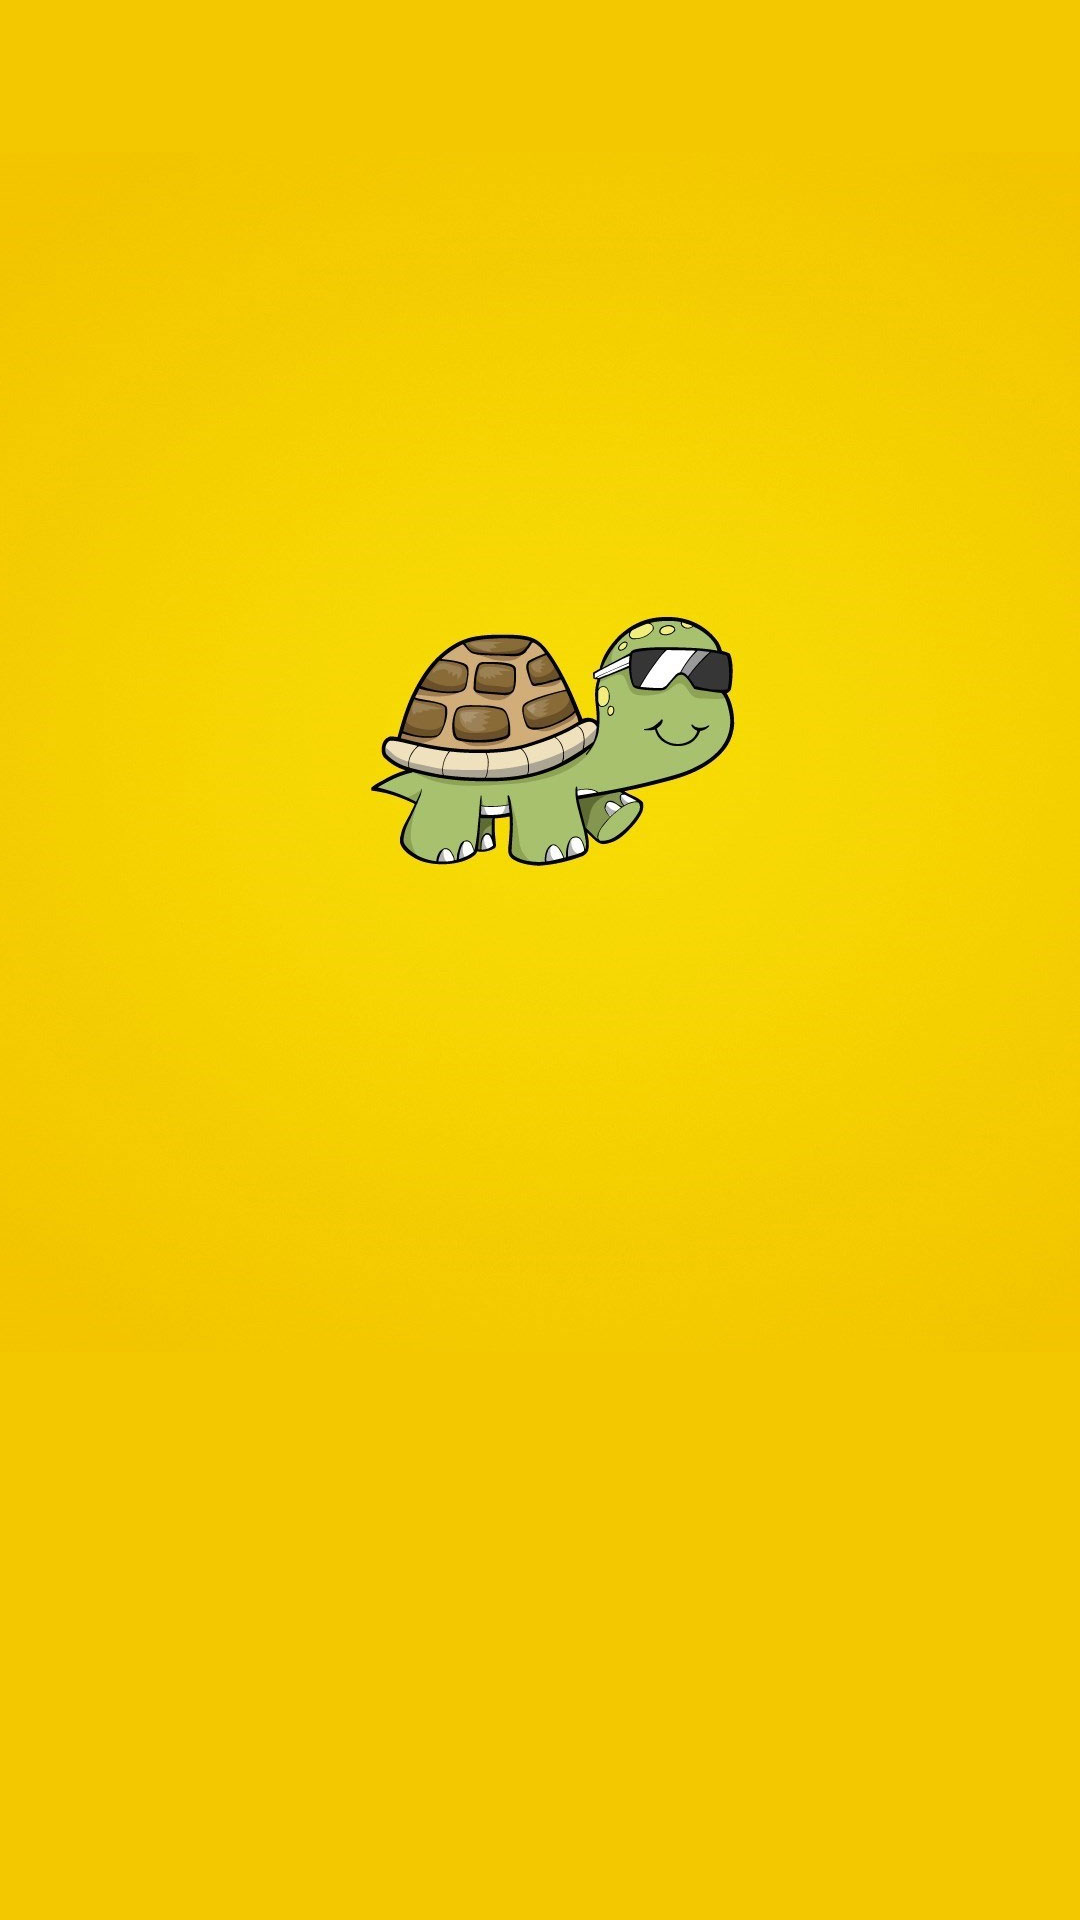 Cute Turtle Wallpaper For iPhone X